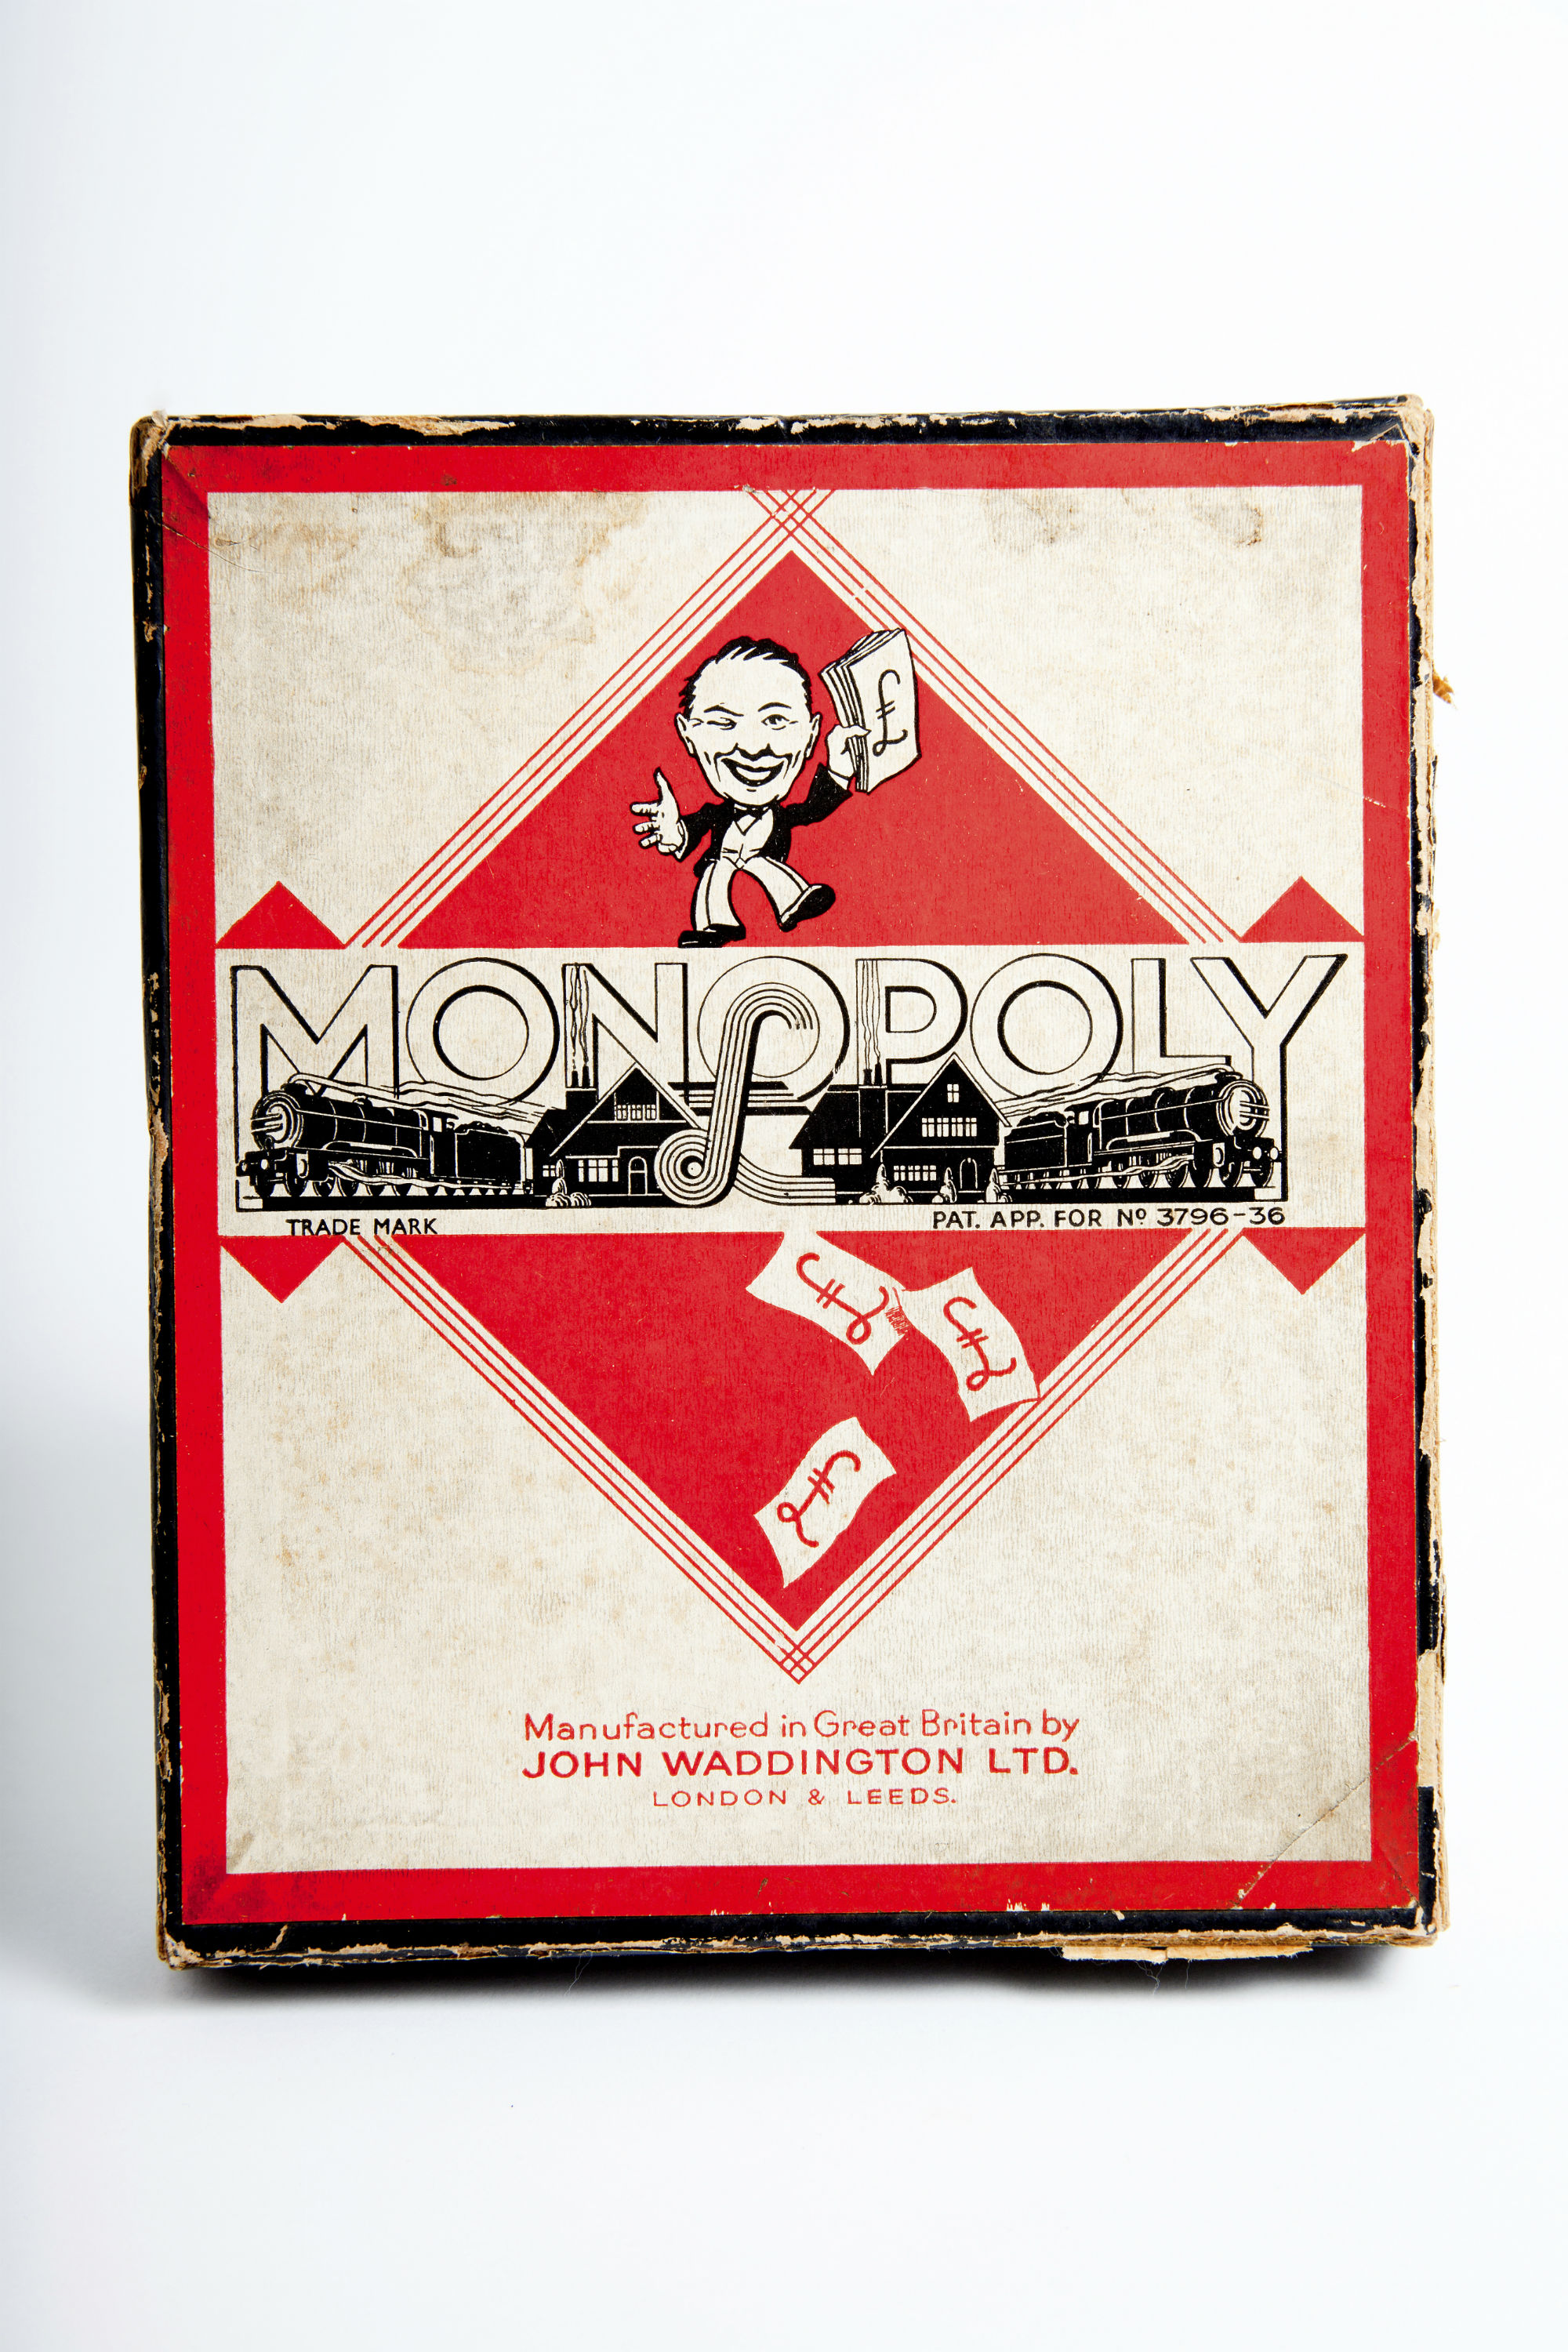 Old Board Games Can be Worth Monopoly Money, Says Marketplace Expert